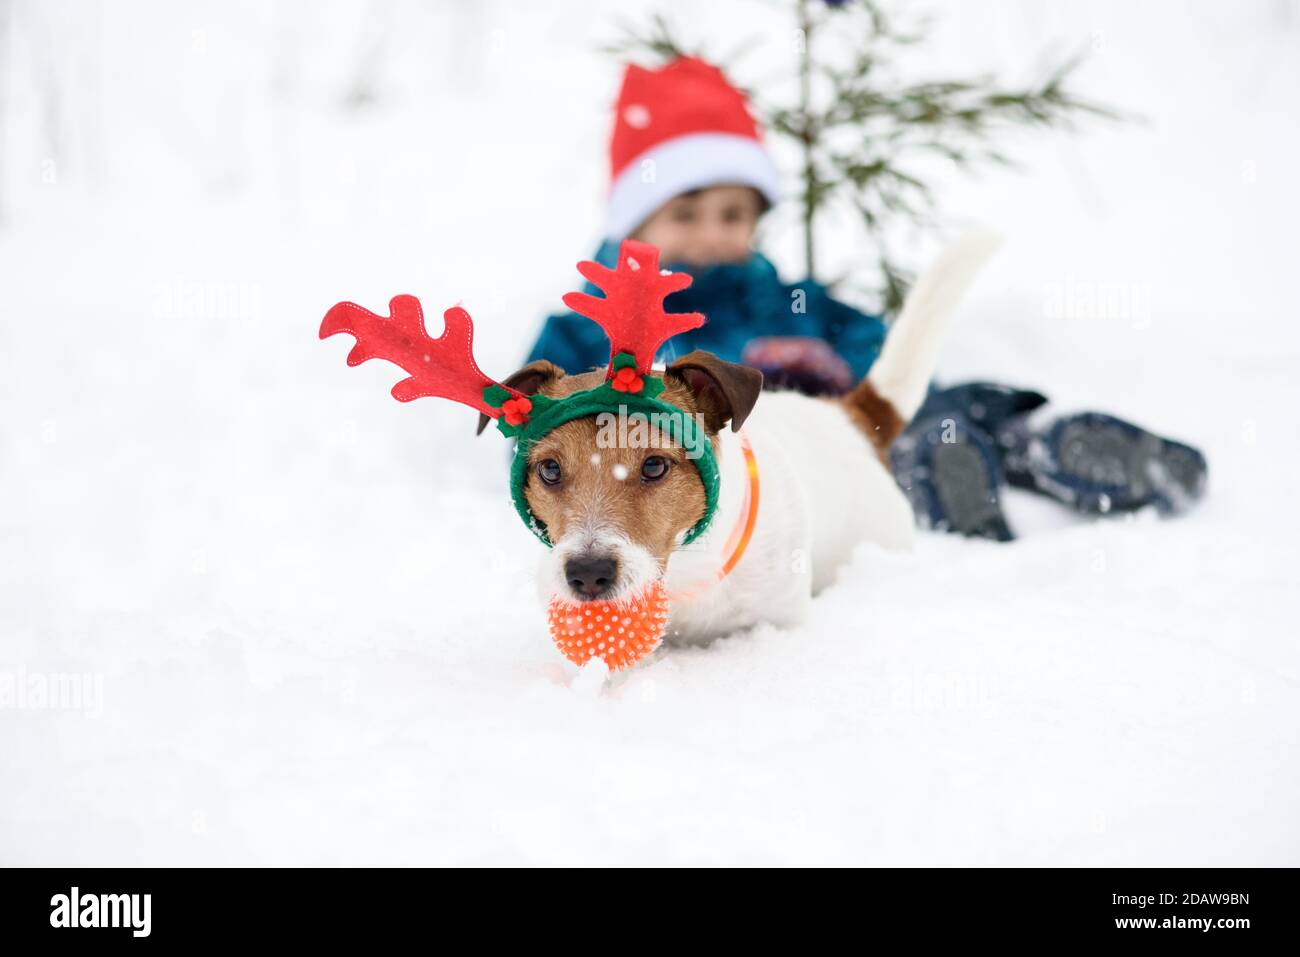 Dog wearing reindeer antlers and little Santa Claus in red hat romping in snow with toy Stock Photo